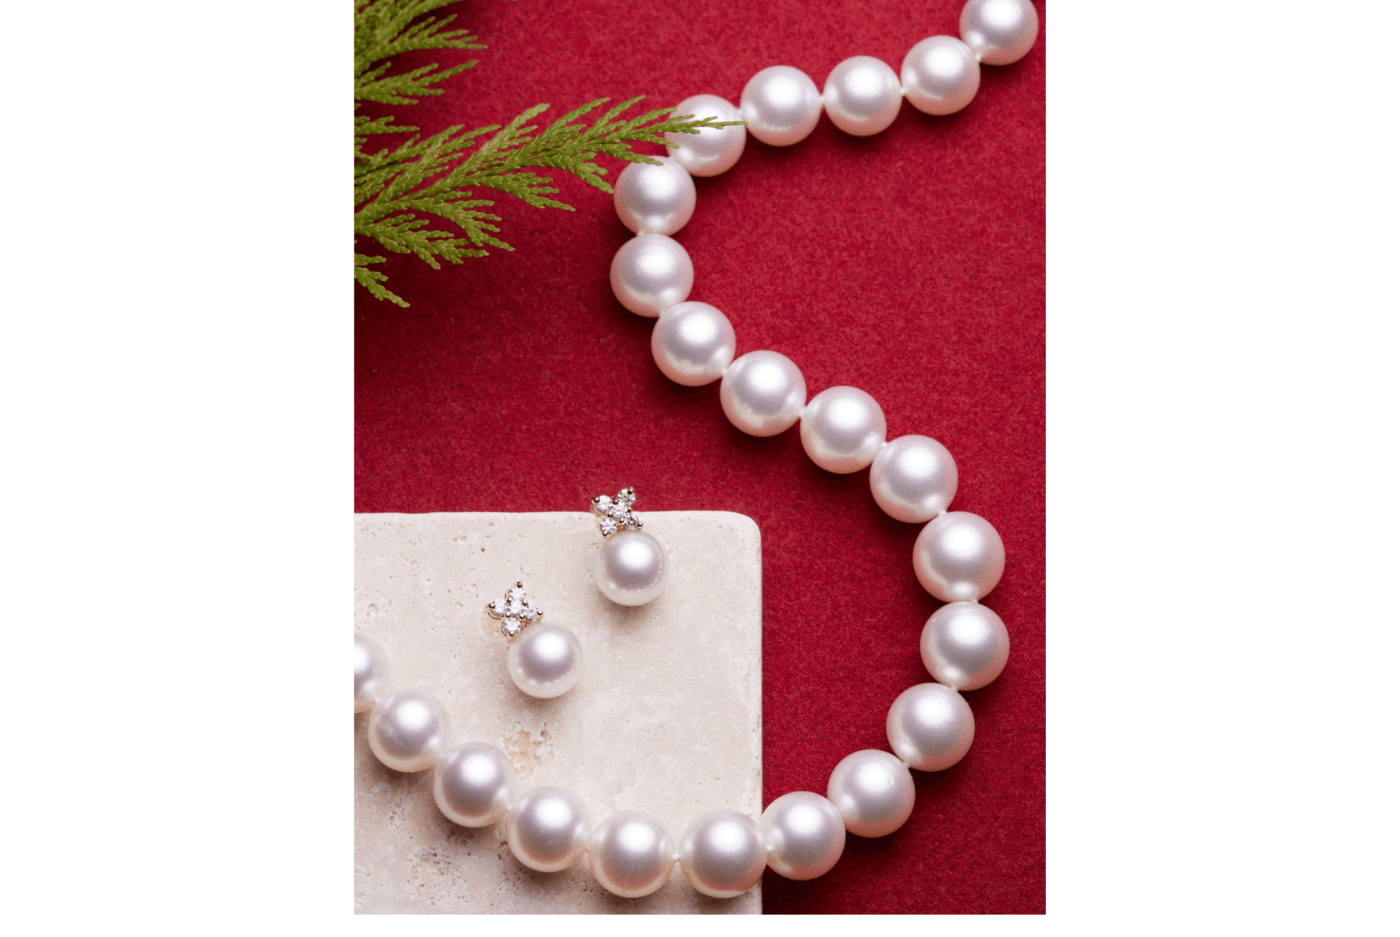 White strand of pearls with a pair of diamond white south sea pearl earrings